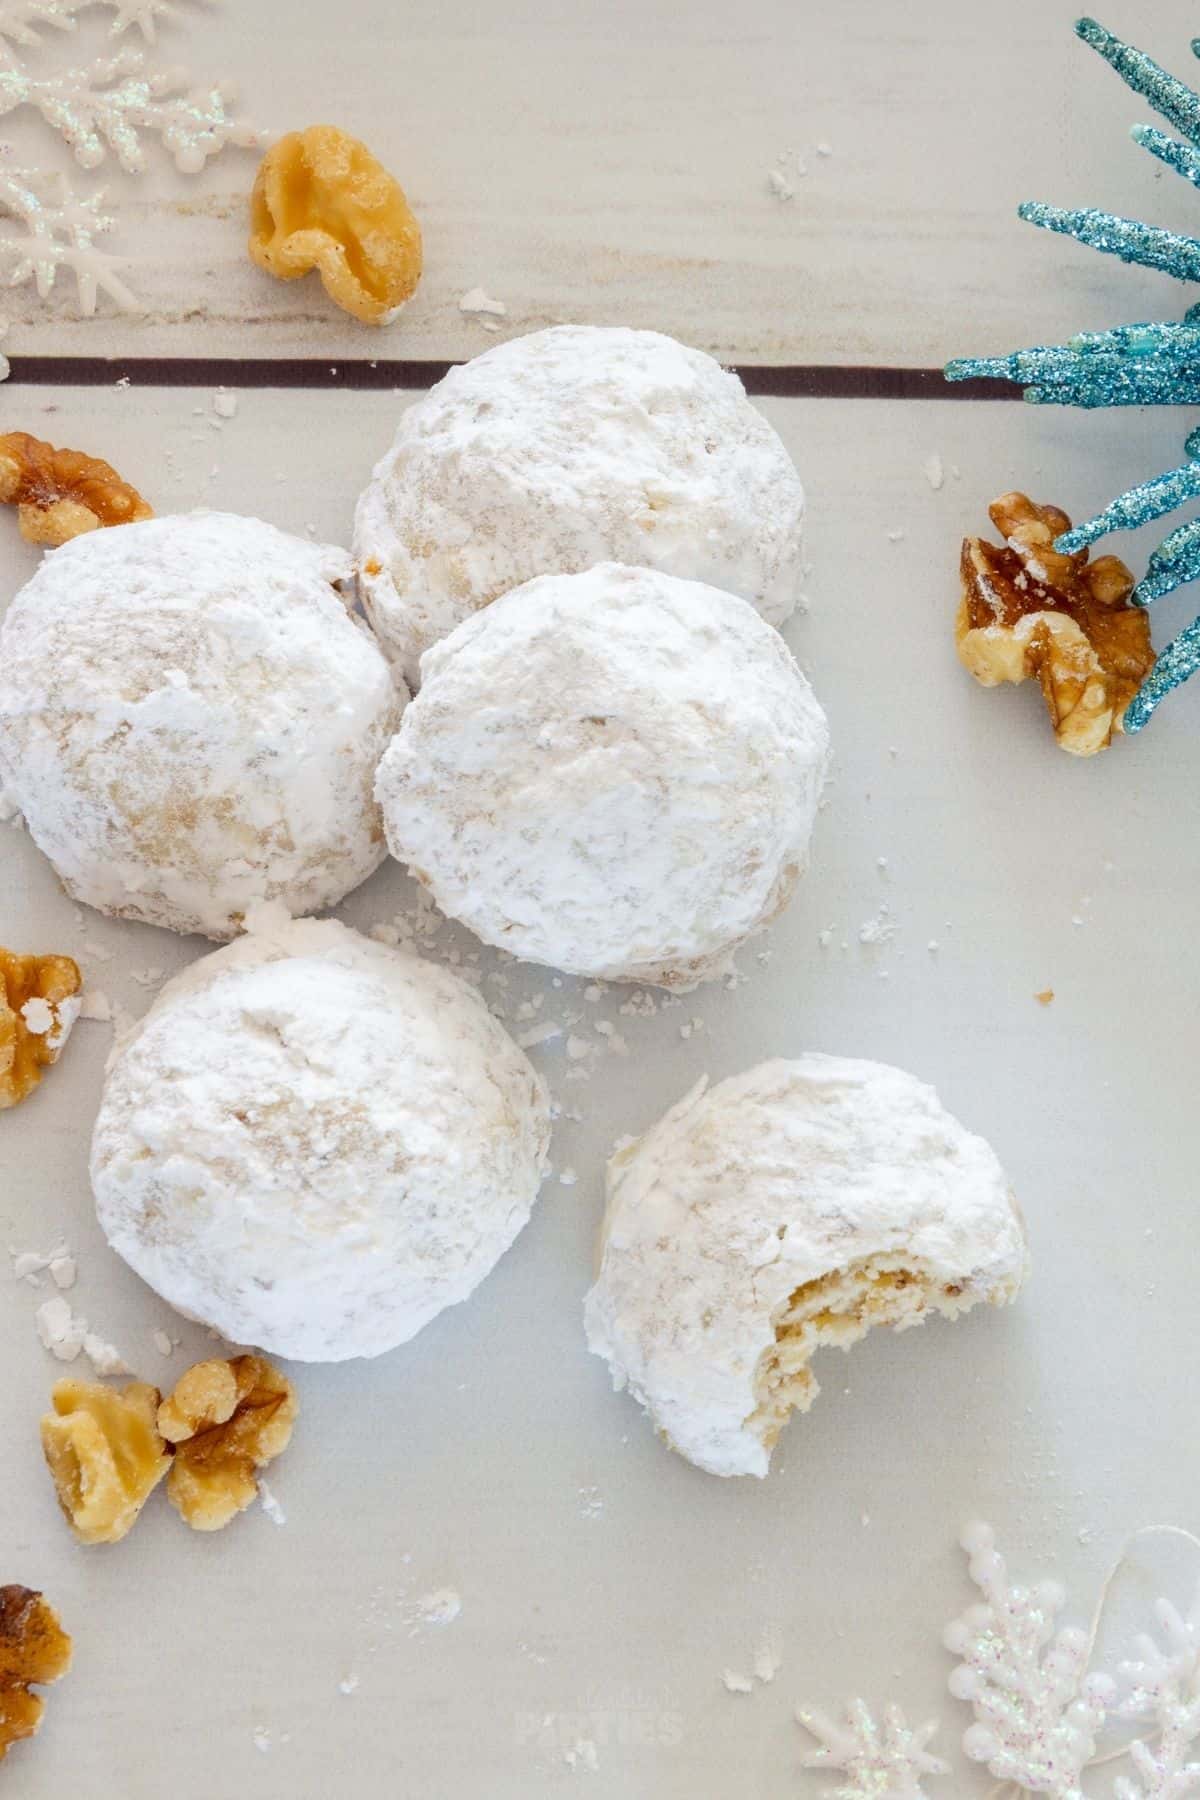 Powdery Russian tea cakes - also known as snowballs - are on a white wood surface.